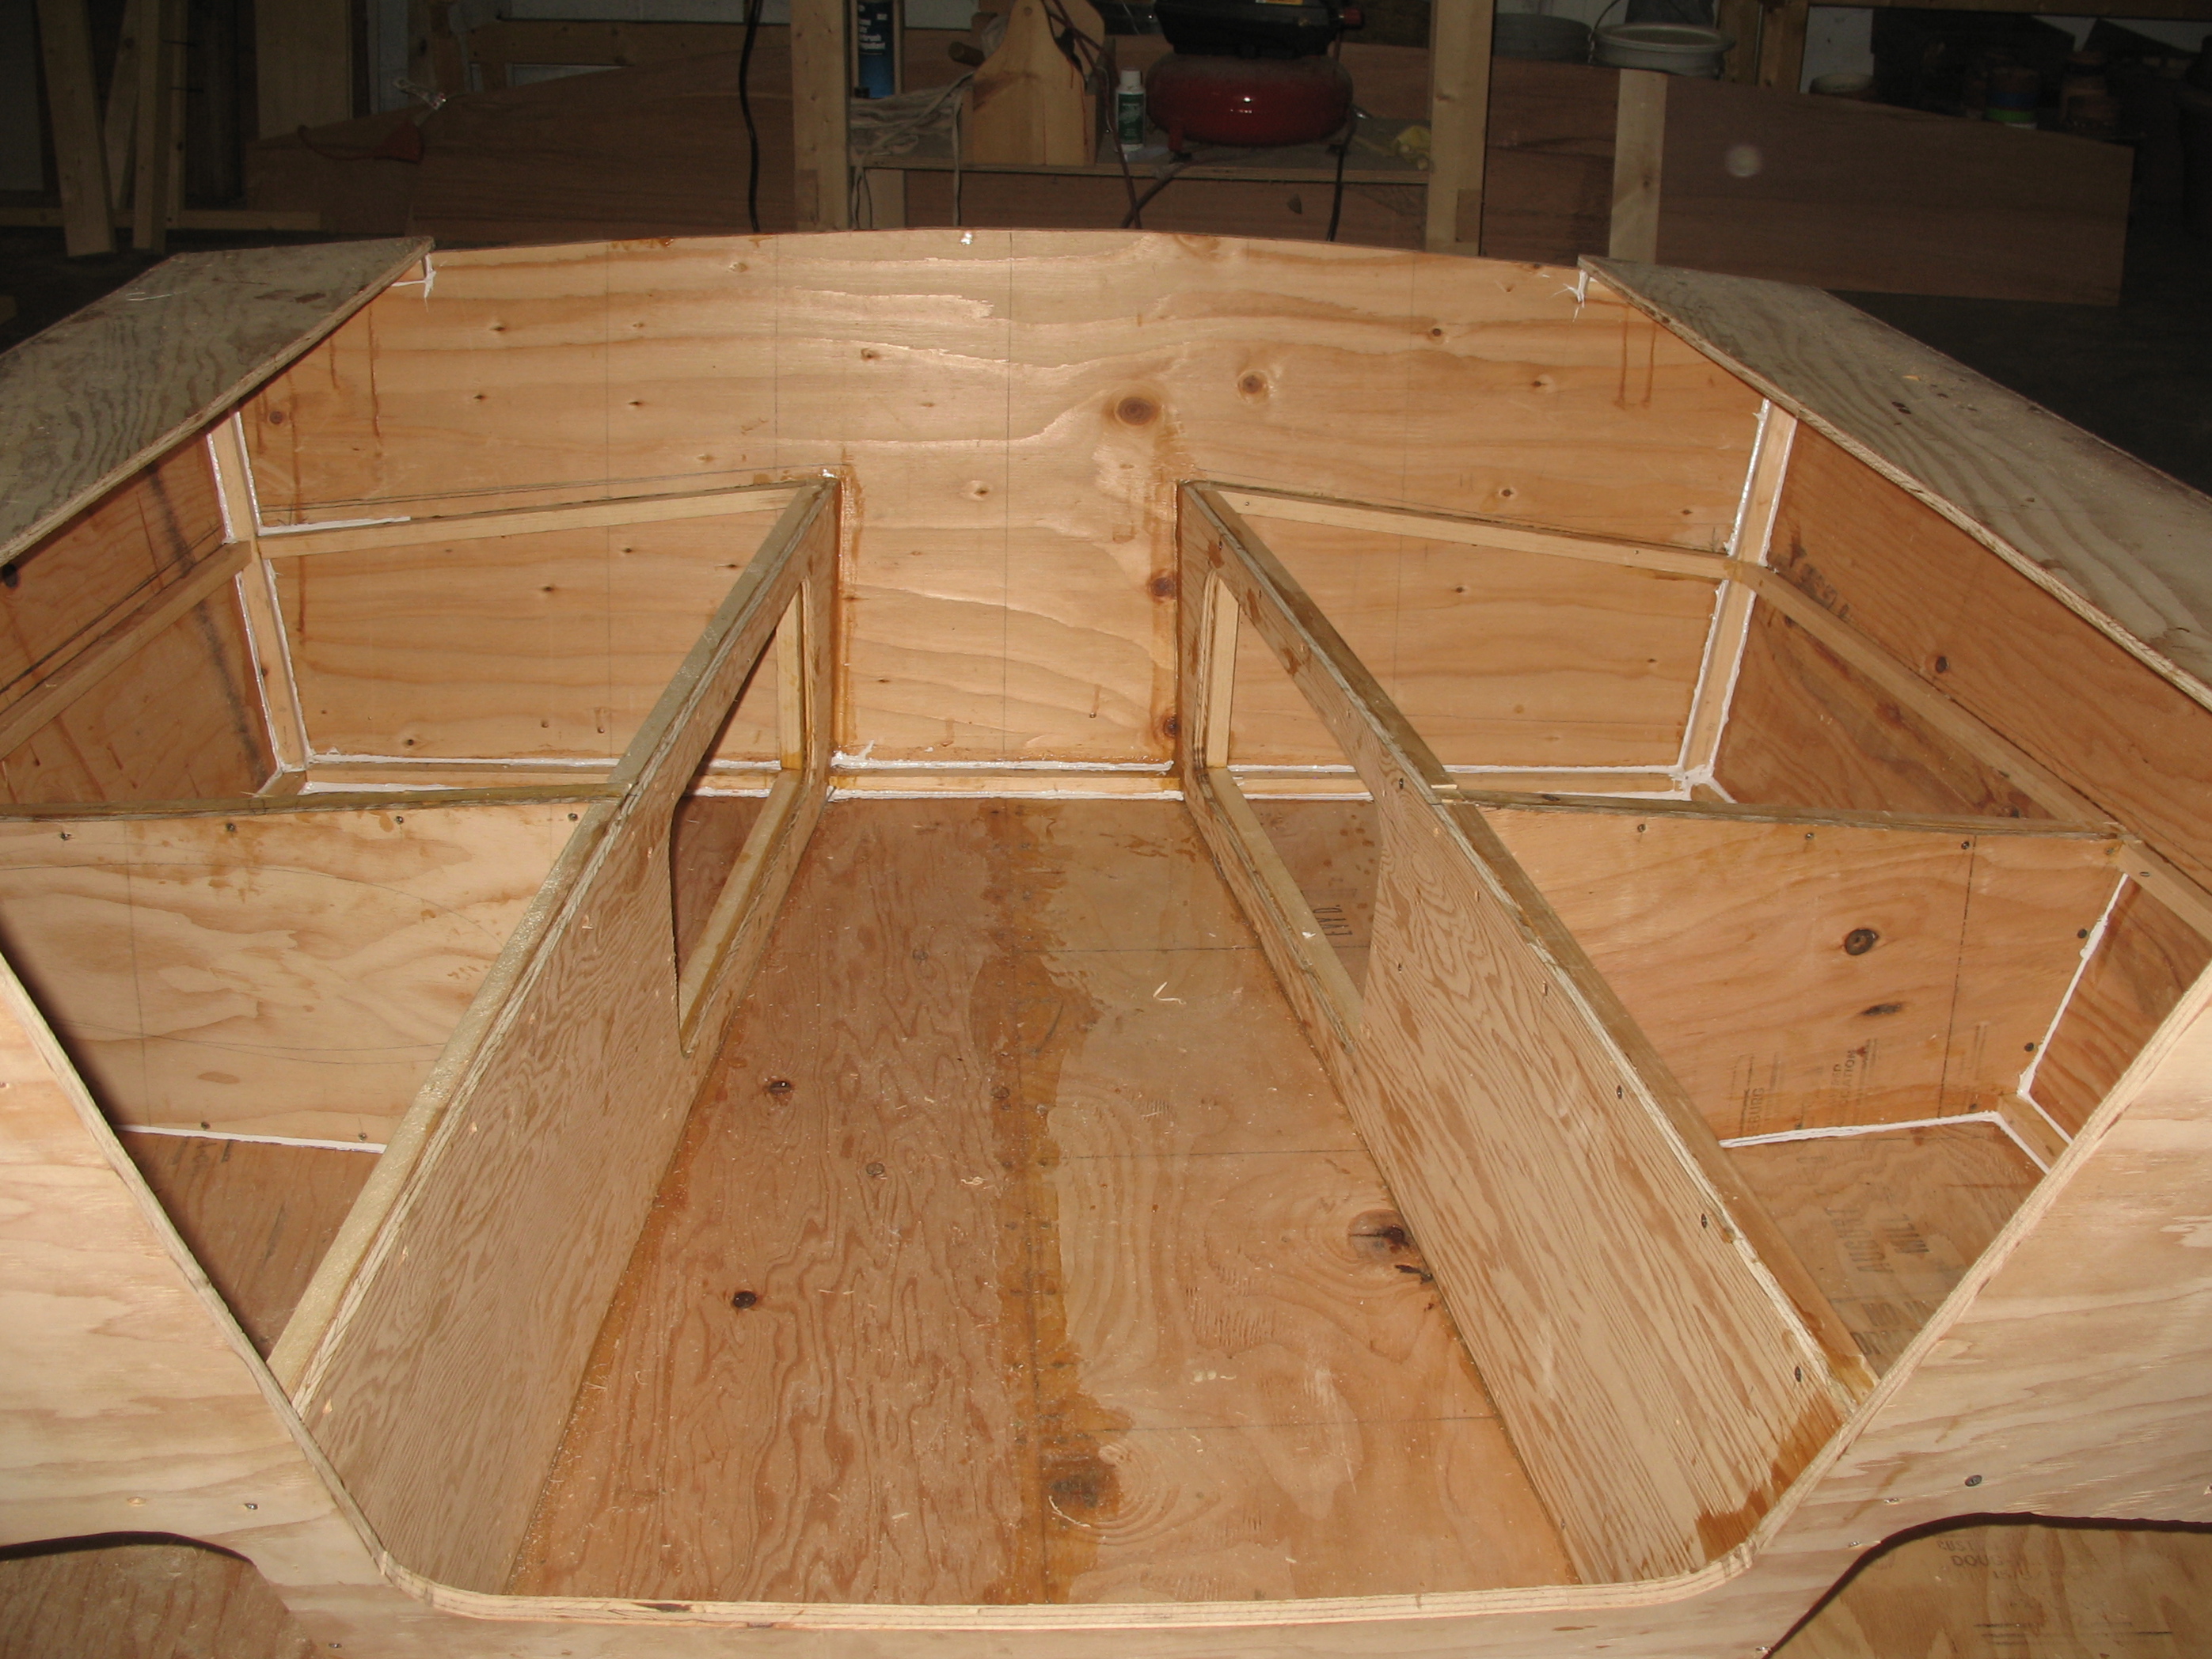 building the cabin and seats build a boat, sail away